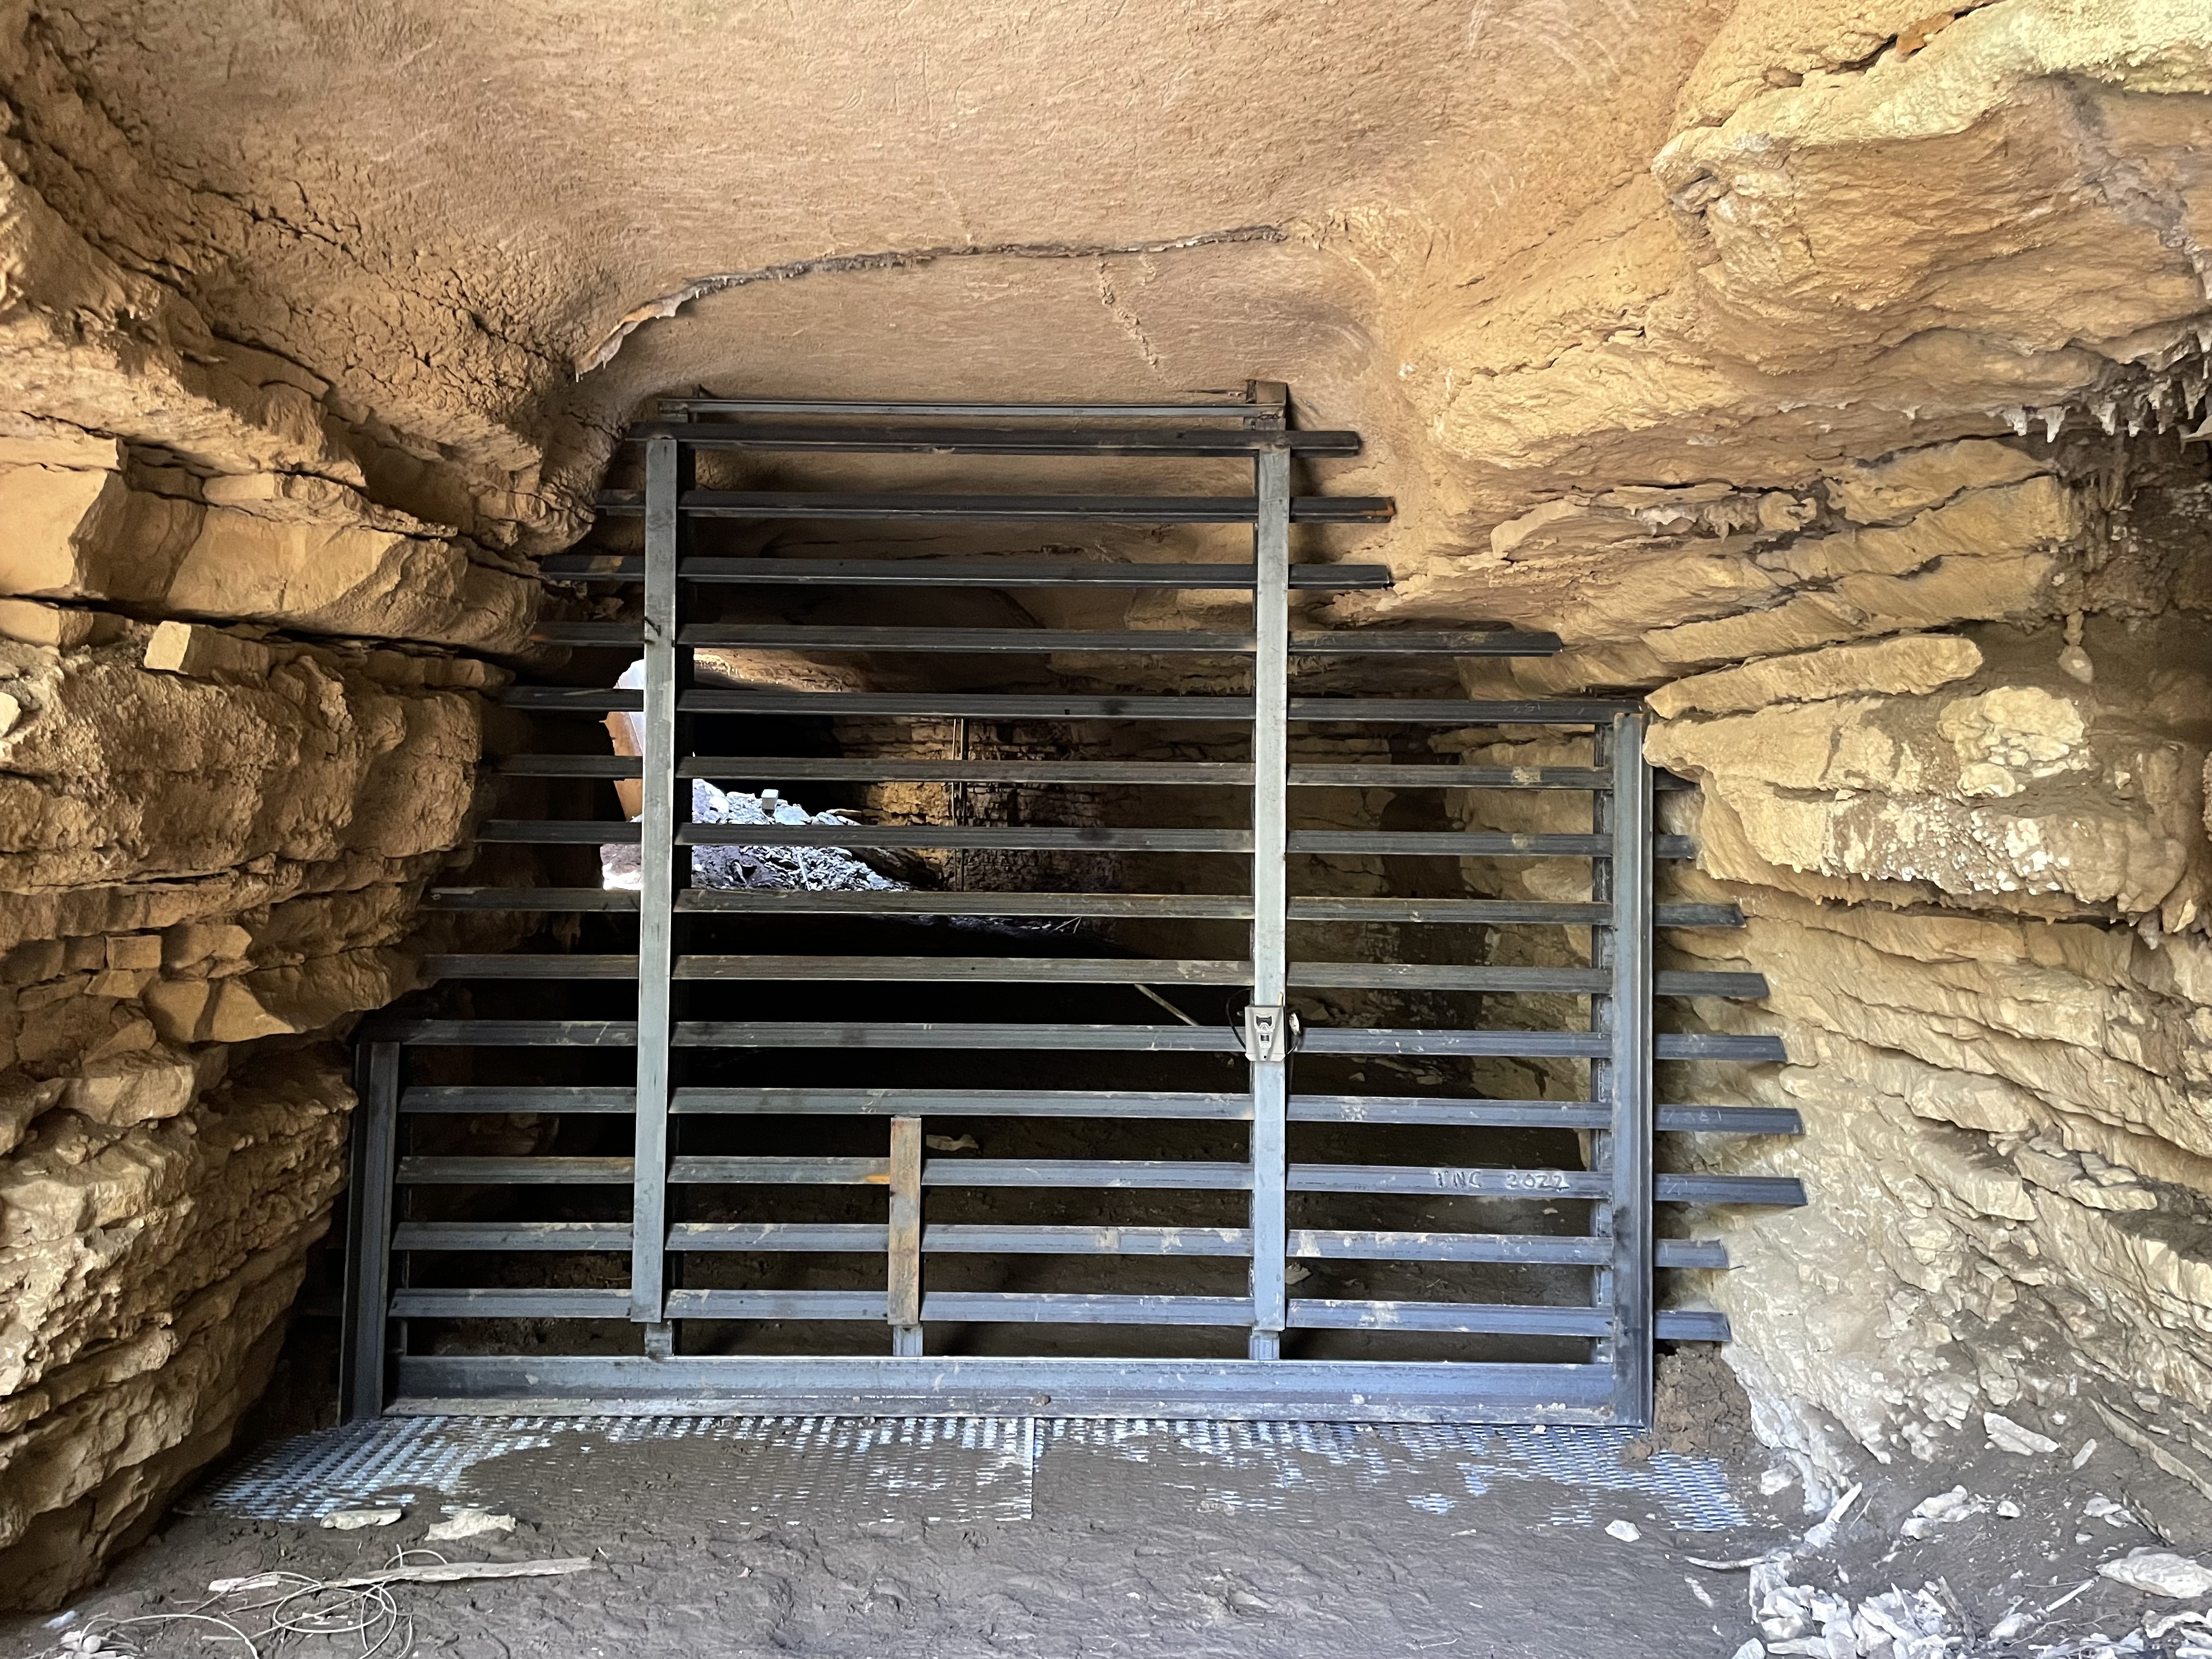 A slatted metal gate built into a cave entrance.